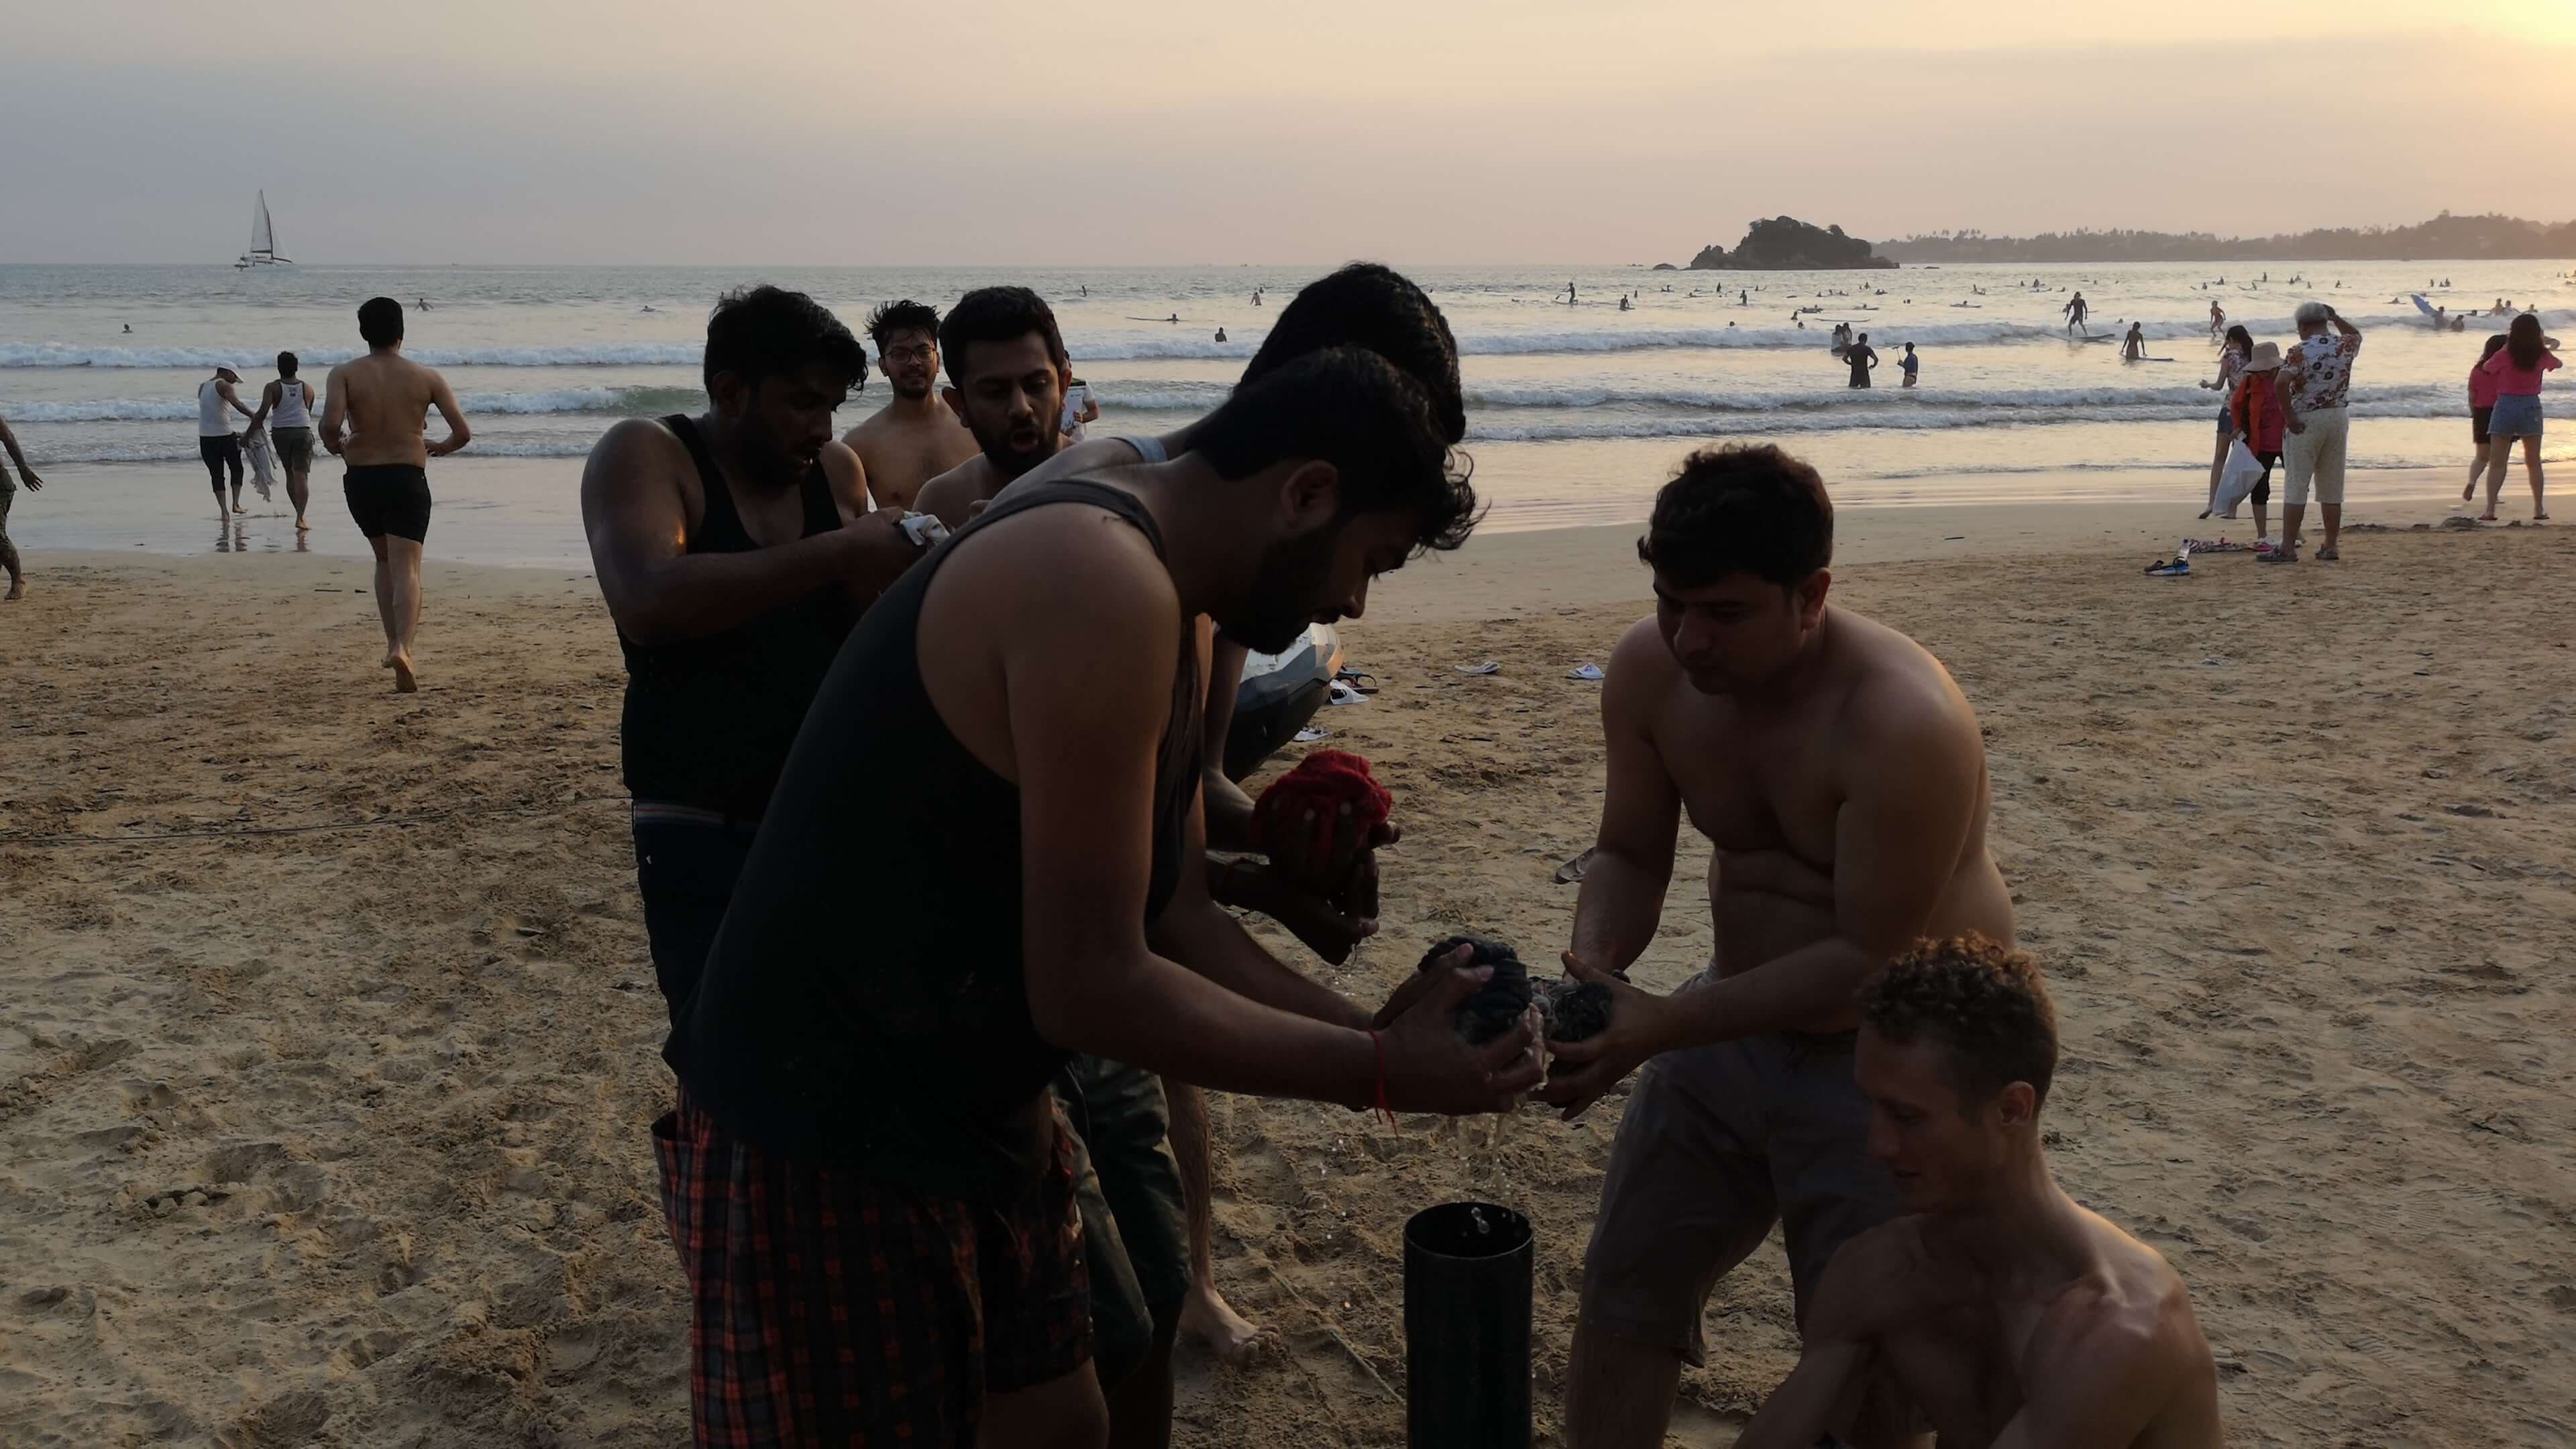 Participating in team building activities at the beach, Sri Lanka.